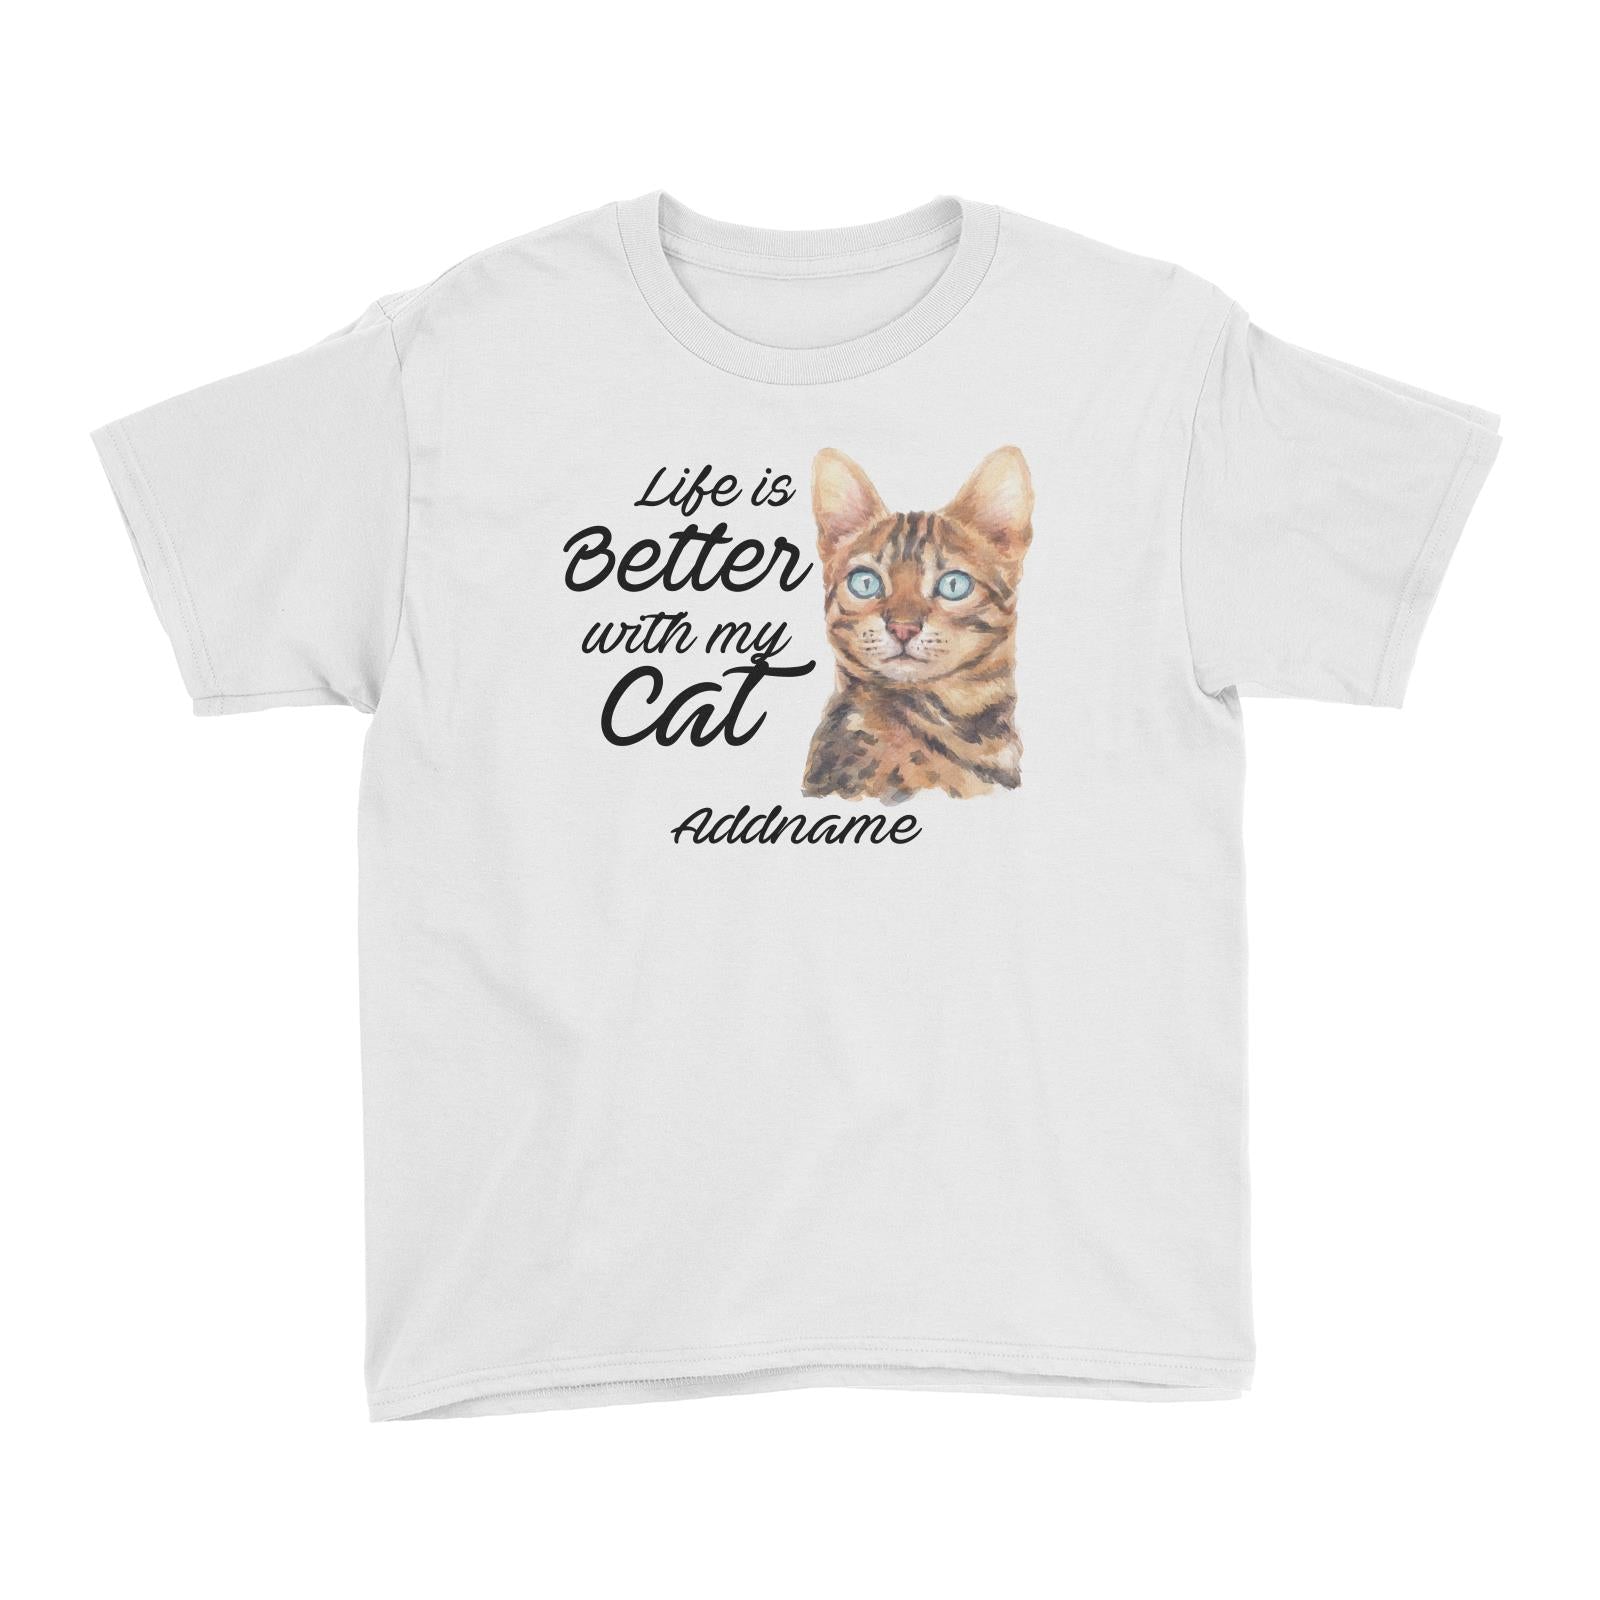 Watercolor Life is Better With My Cat Bengal Addname Kid's T-Shirt